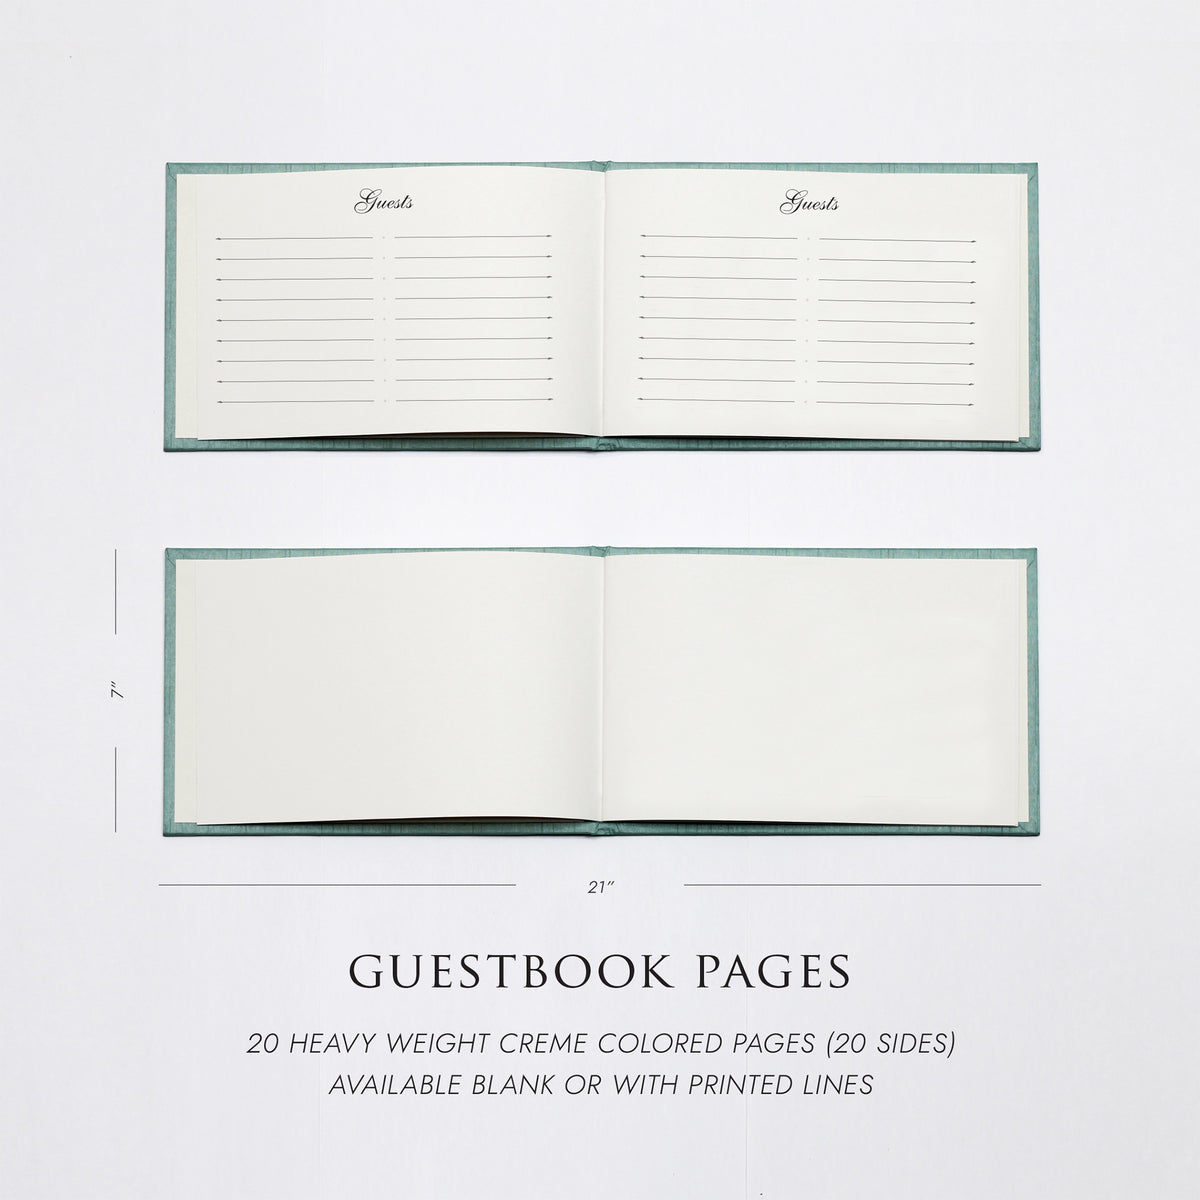 Guestbook Embossed with “Guests” with Pastel Blue Cotton Cover